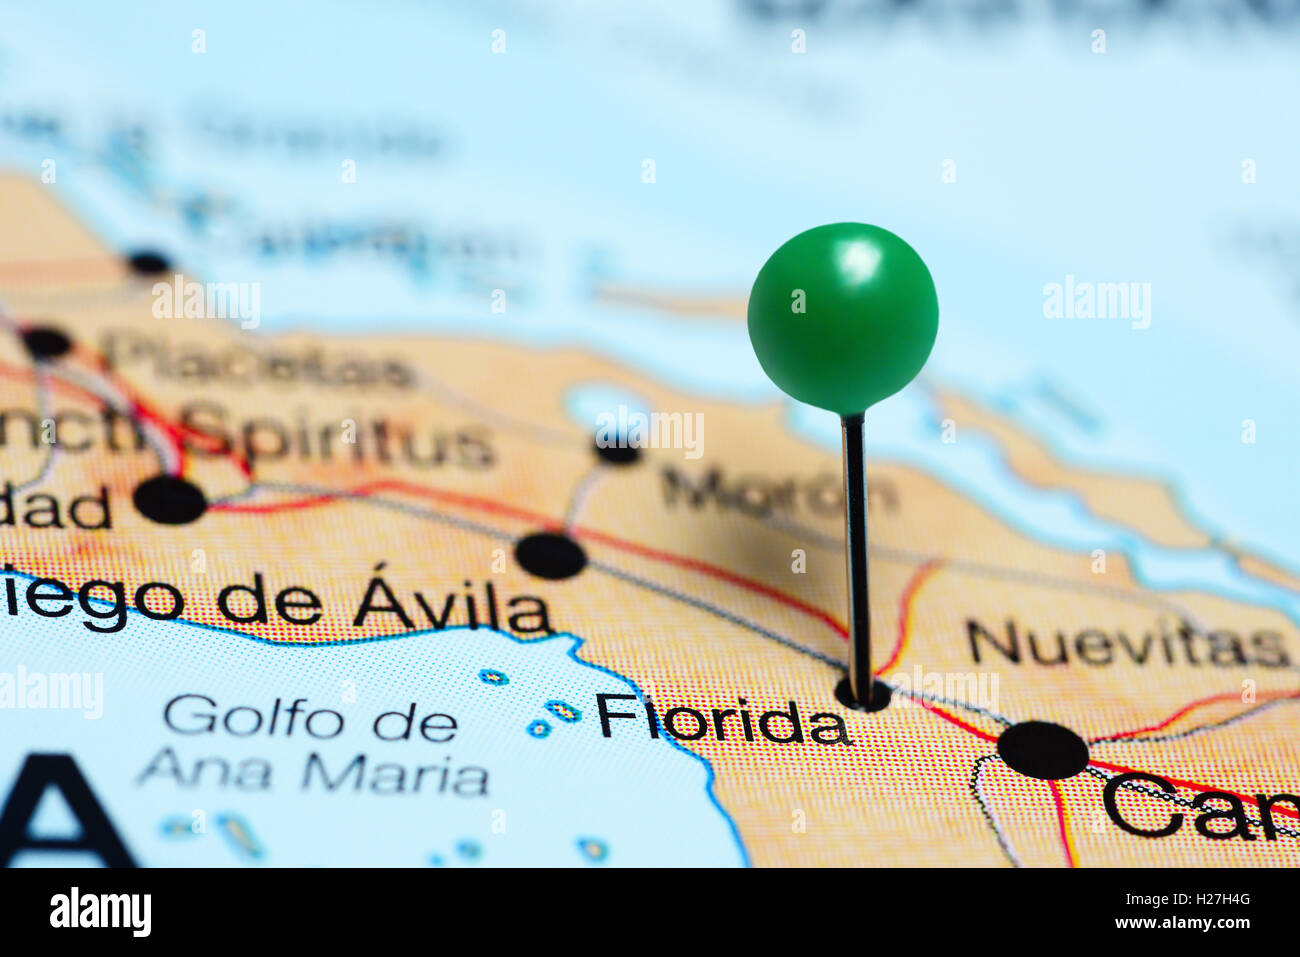 Florida pinned on a map of Cuba Stock Photo